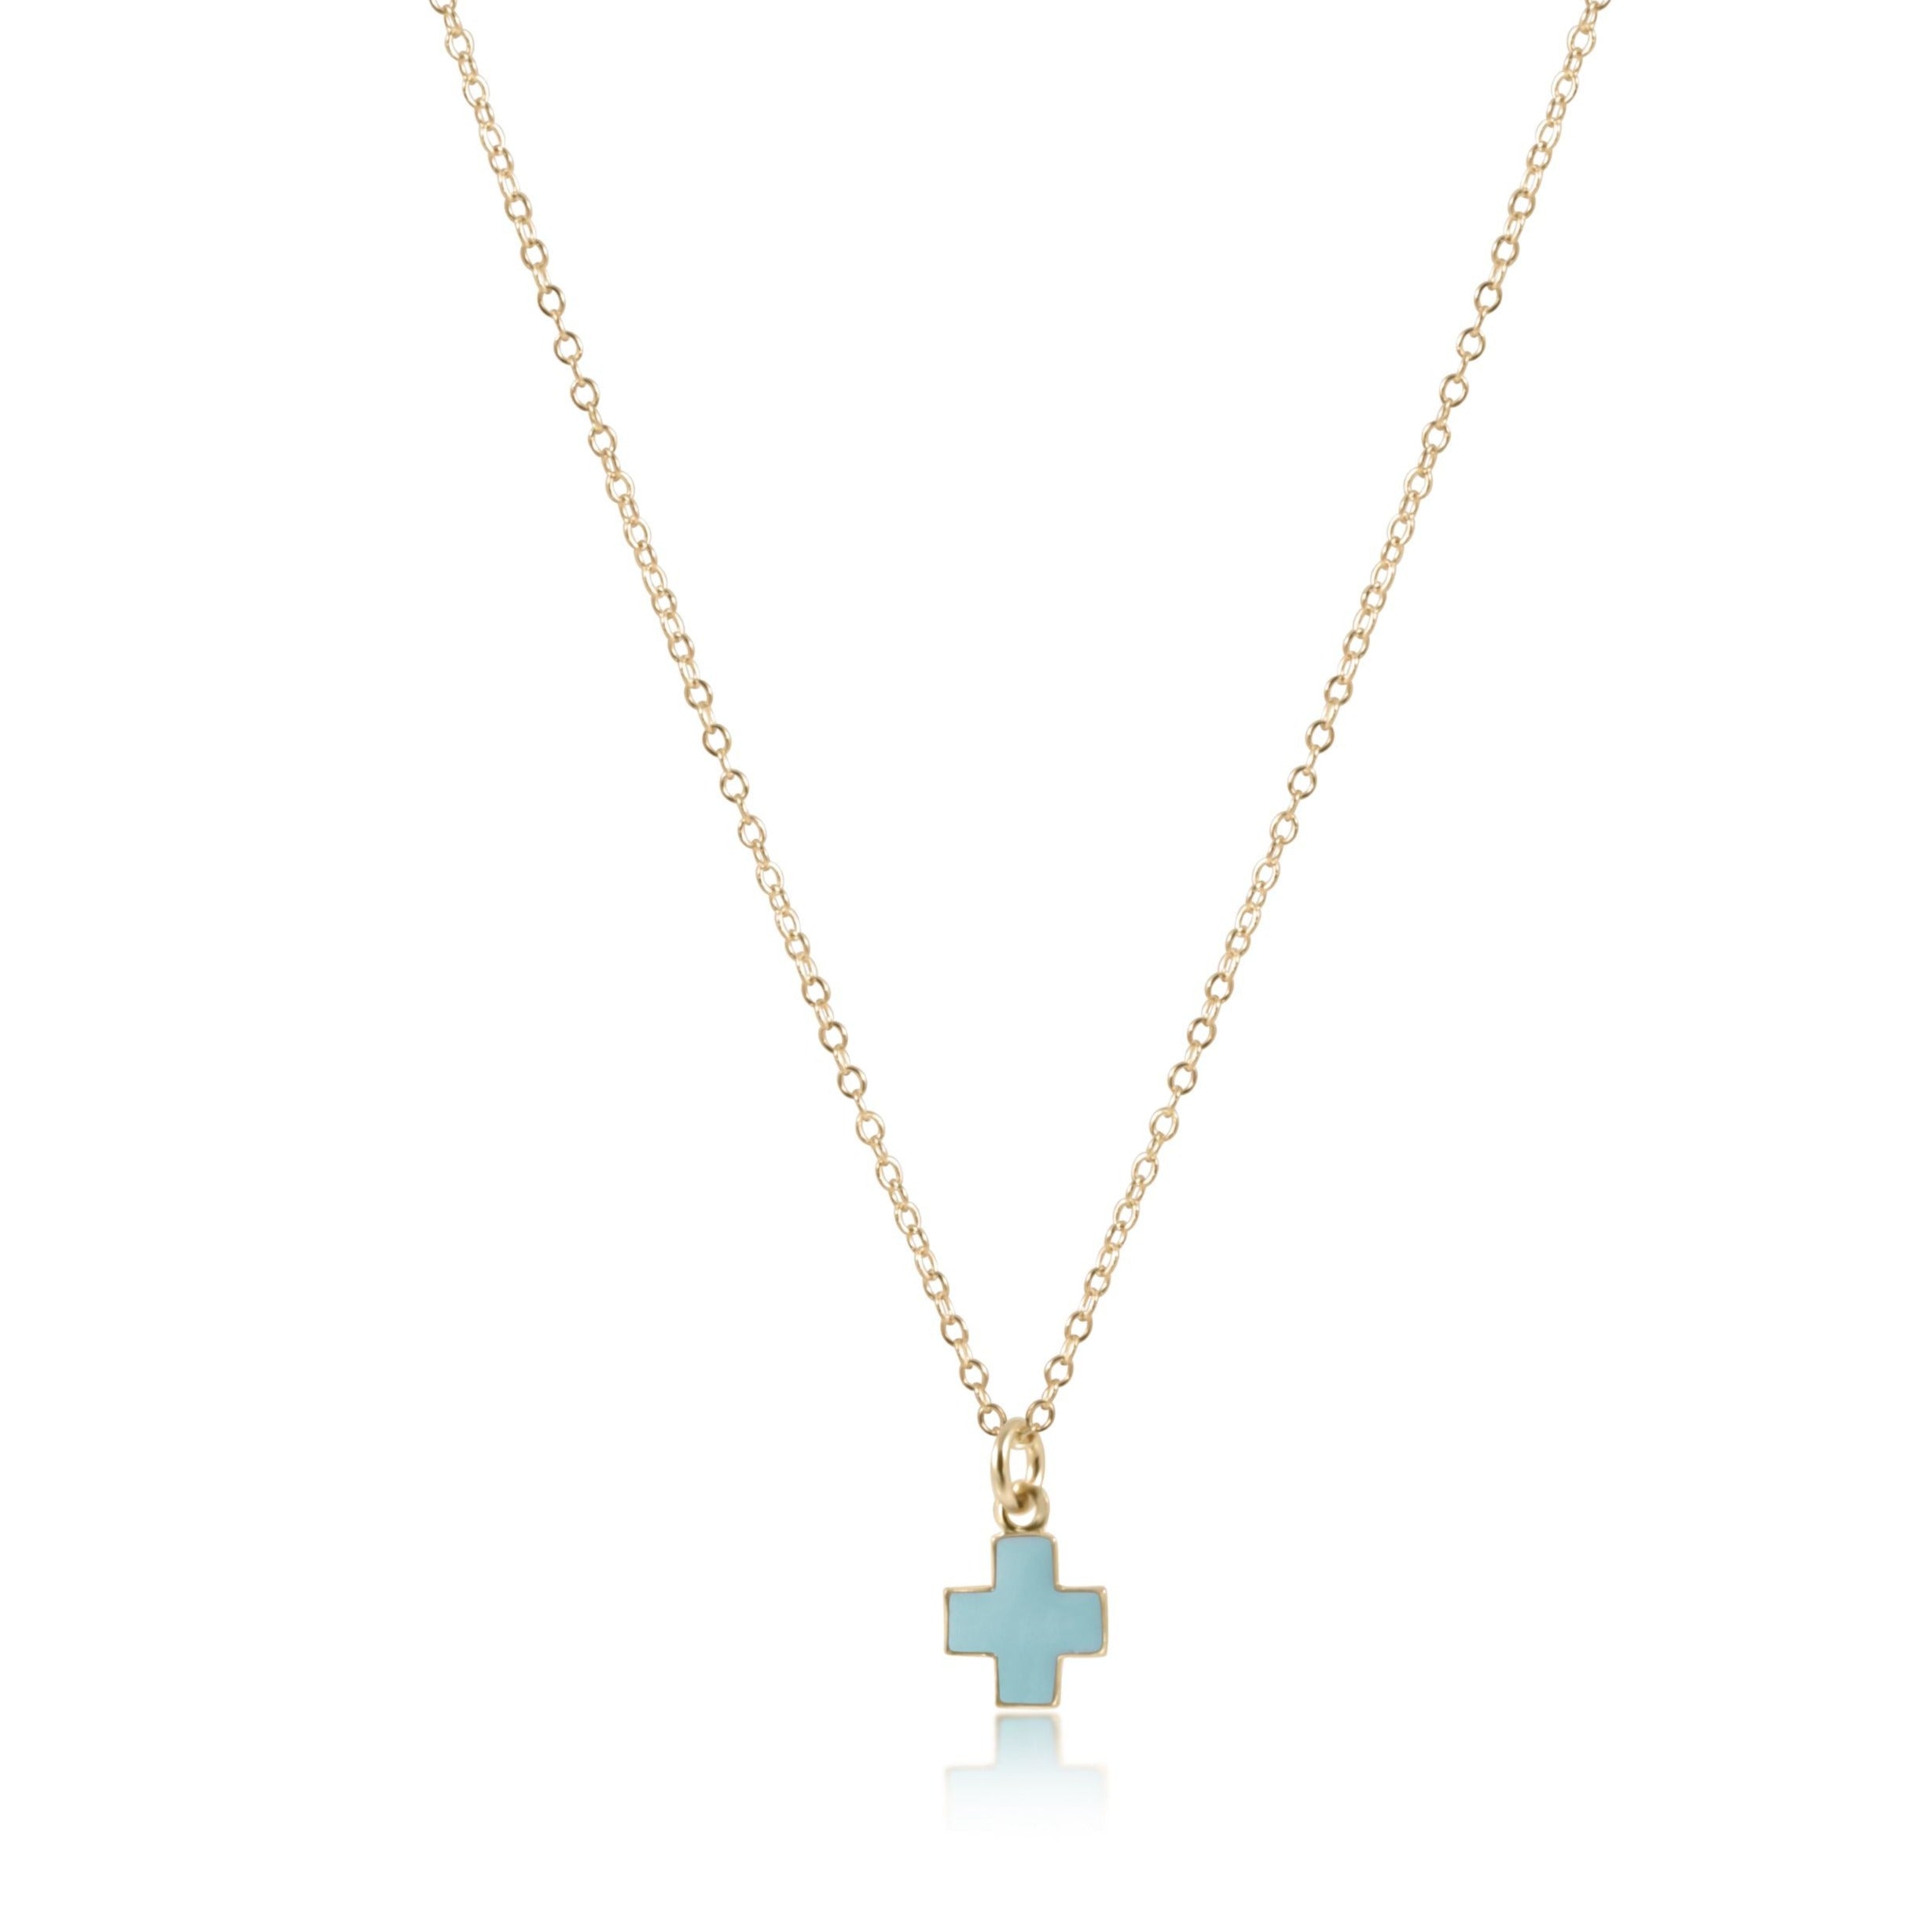 Signature Cross Gold Charm Necklace, 16"